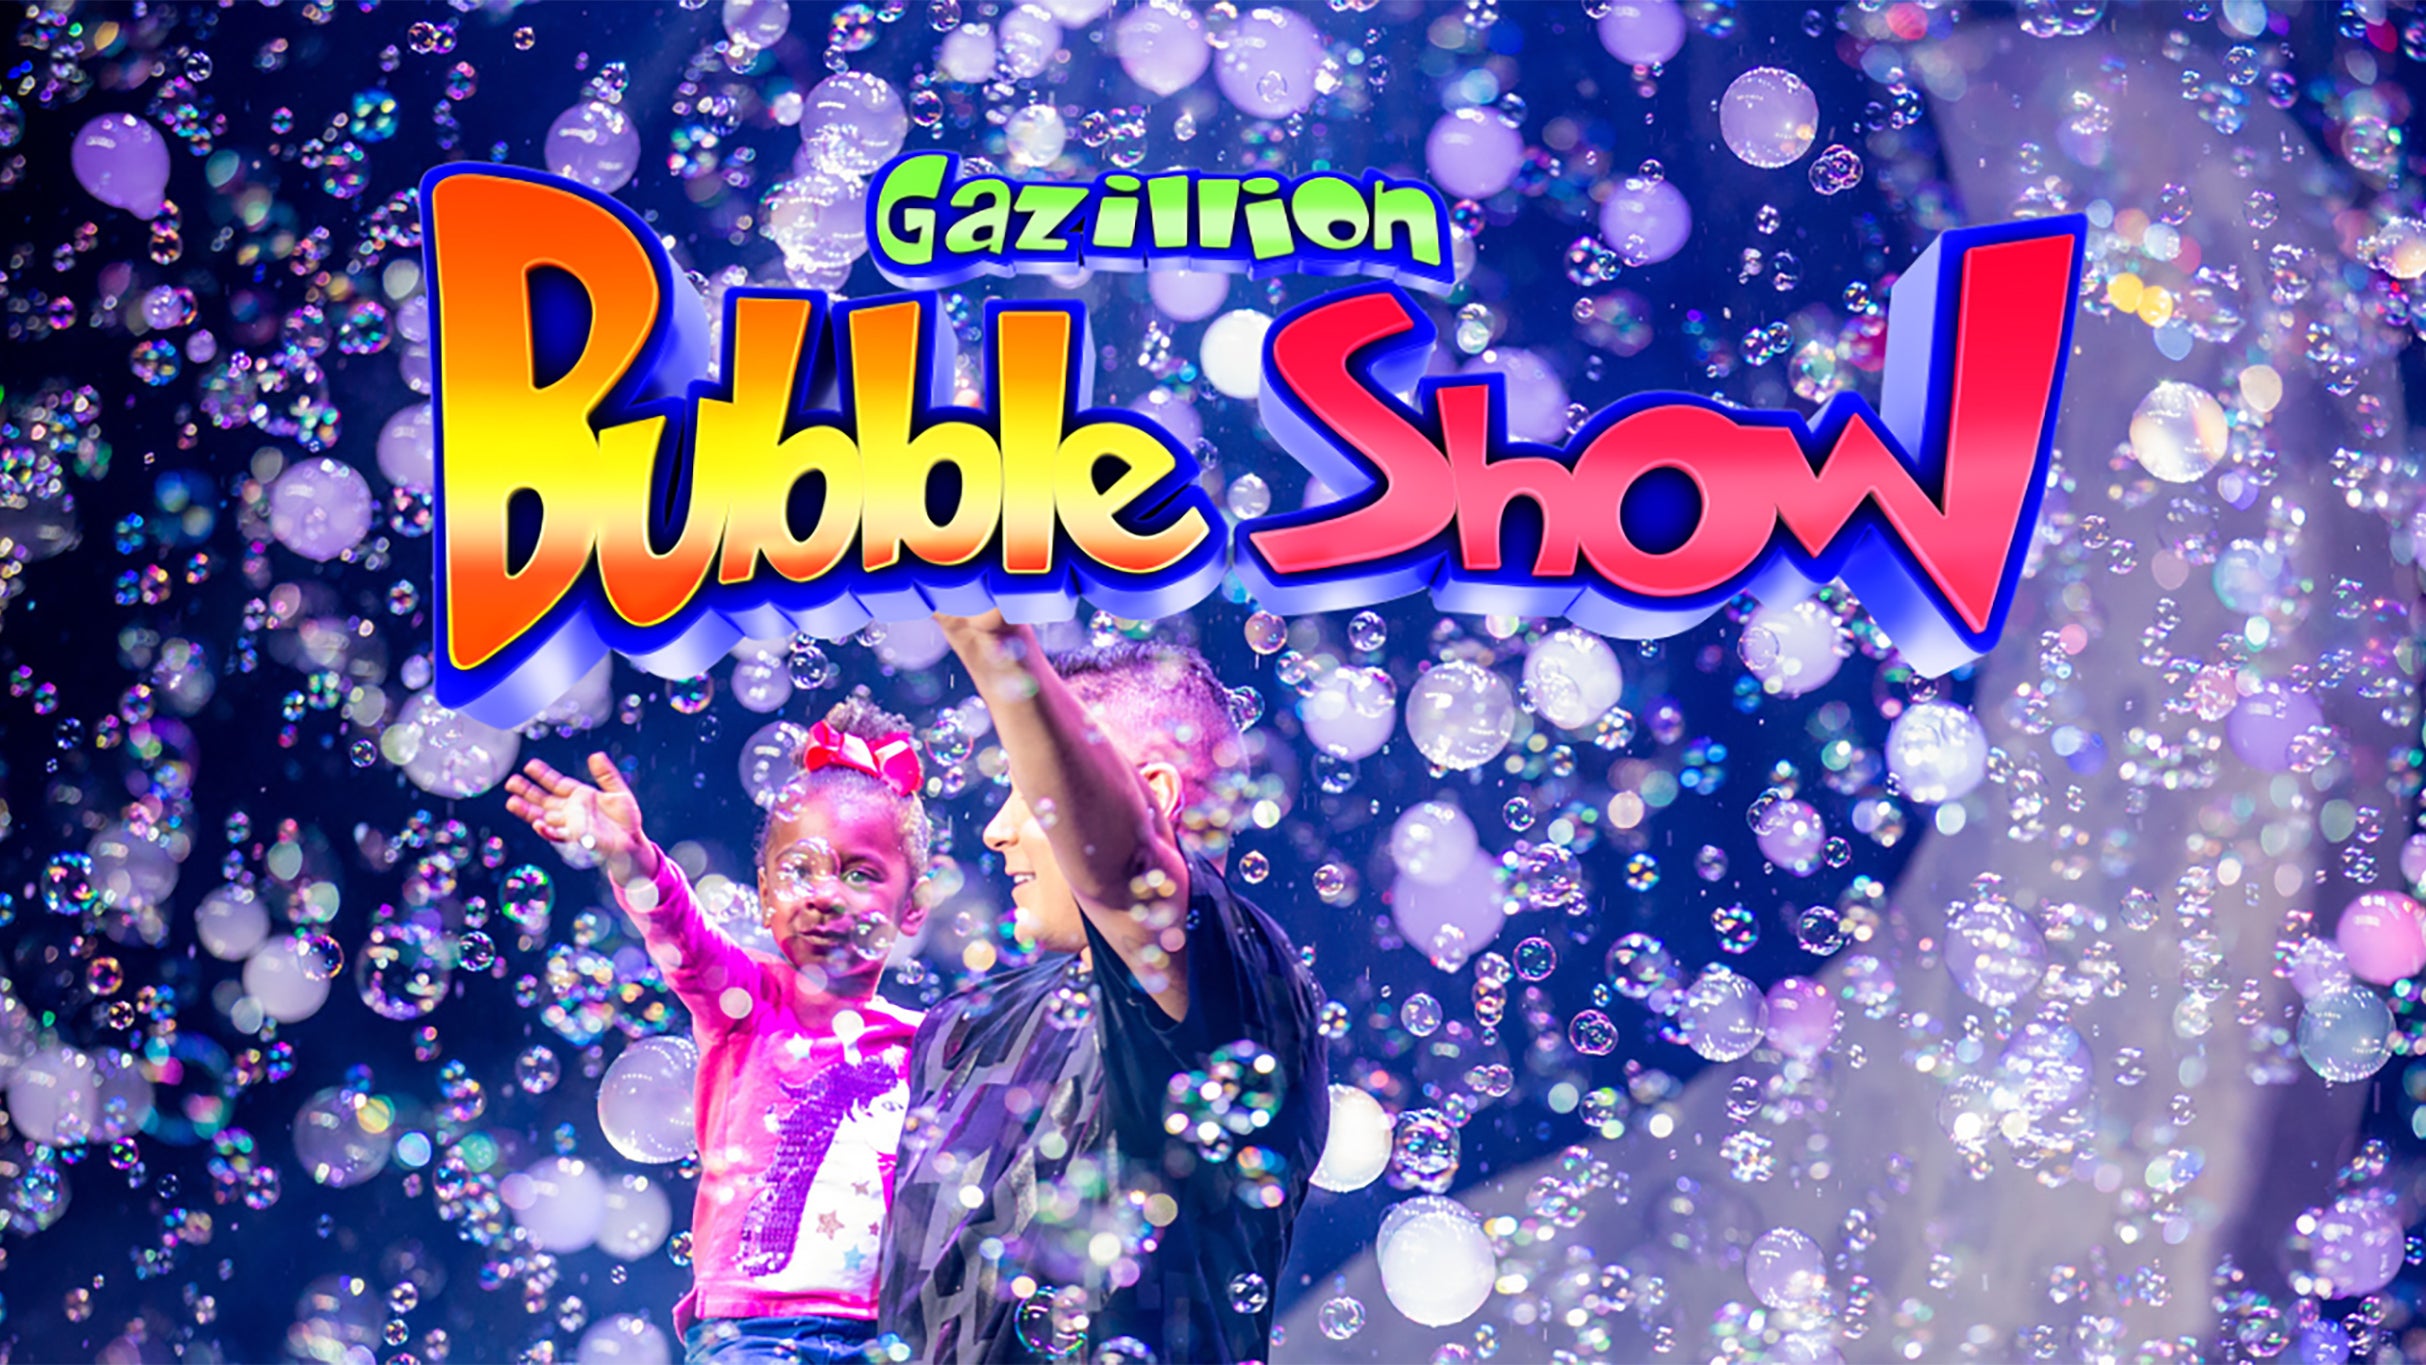 Gazillion Bubble Show at New World Stages – Stage 2 – New York, NY